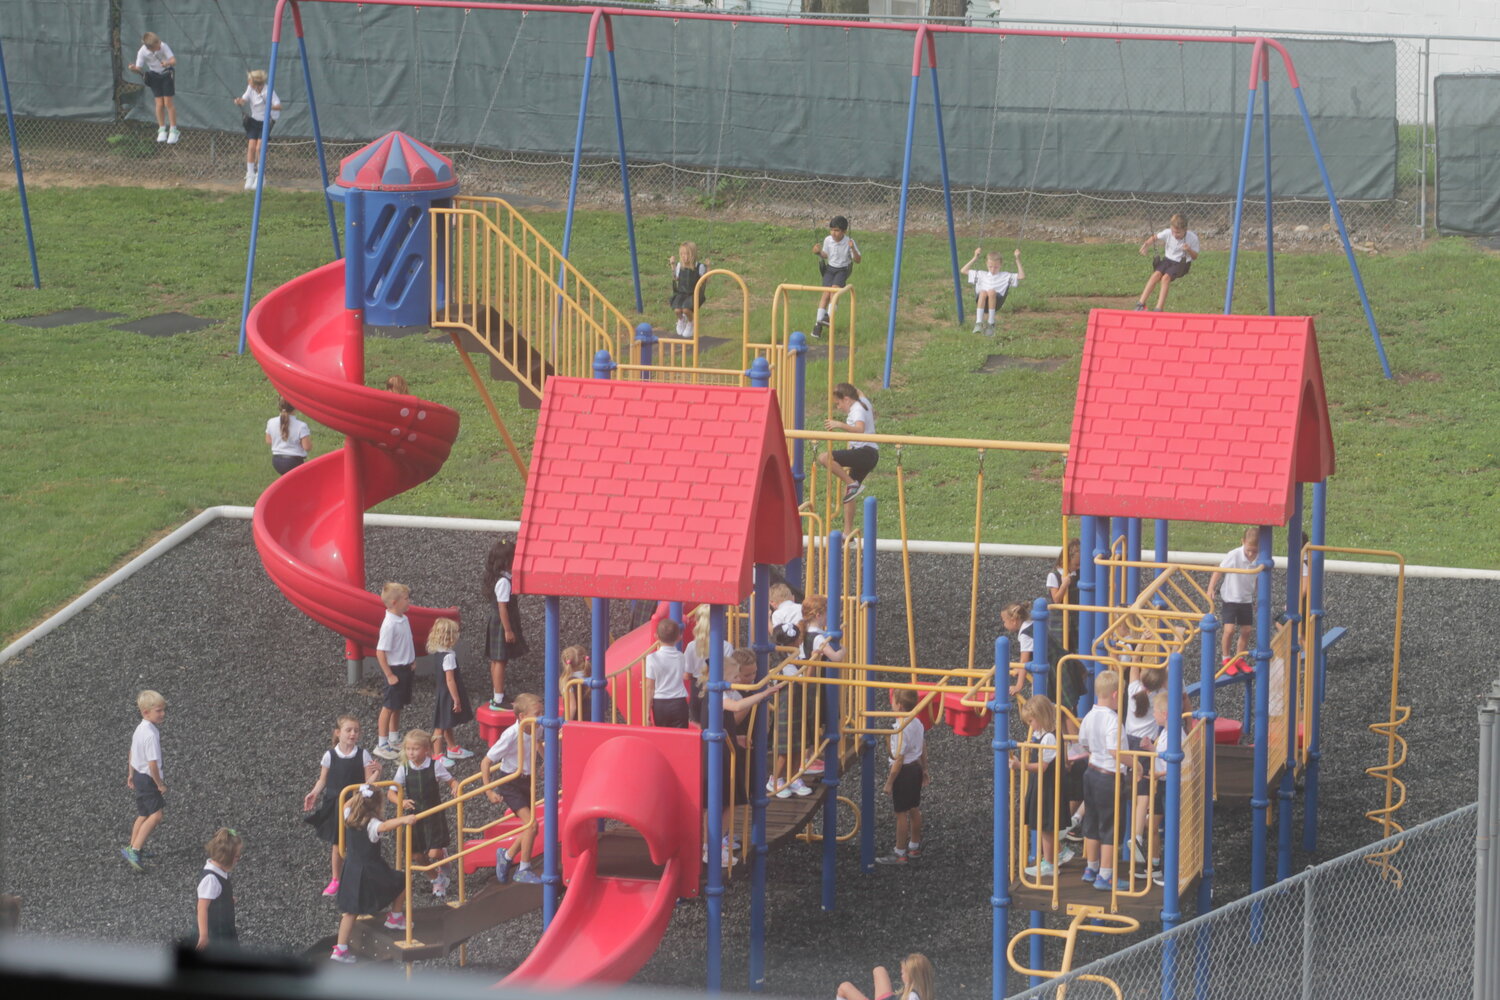 Children enjoy recess on their first day of school at Holy Family School in Hannibal.